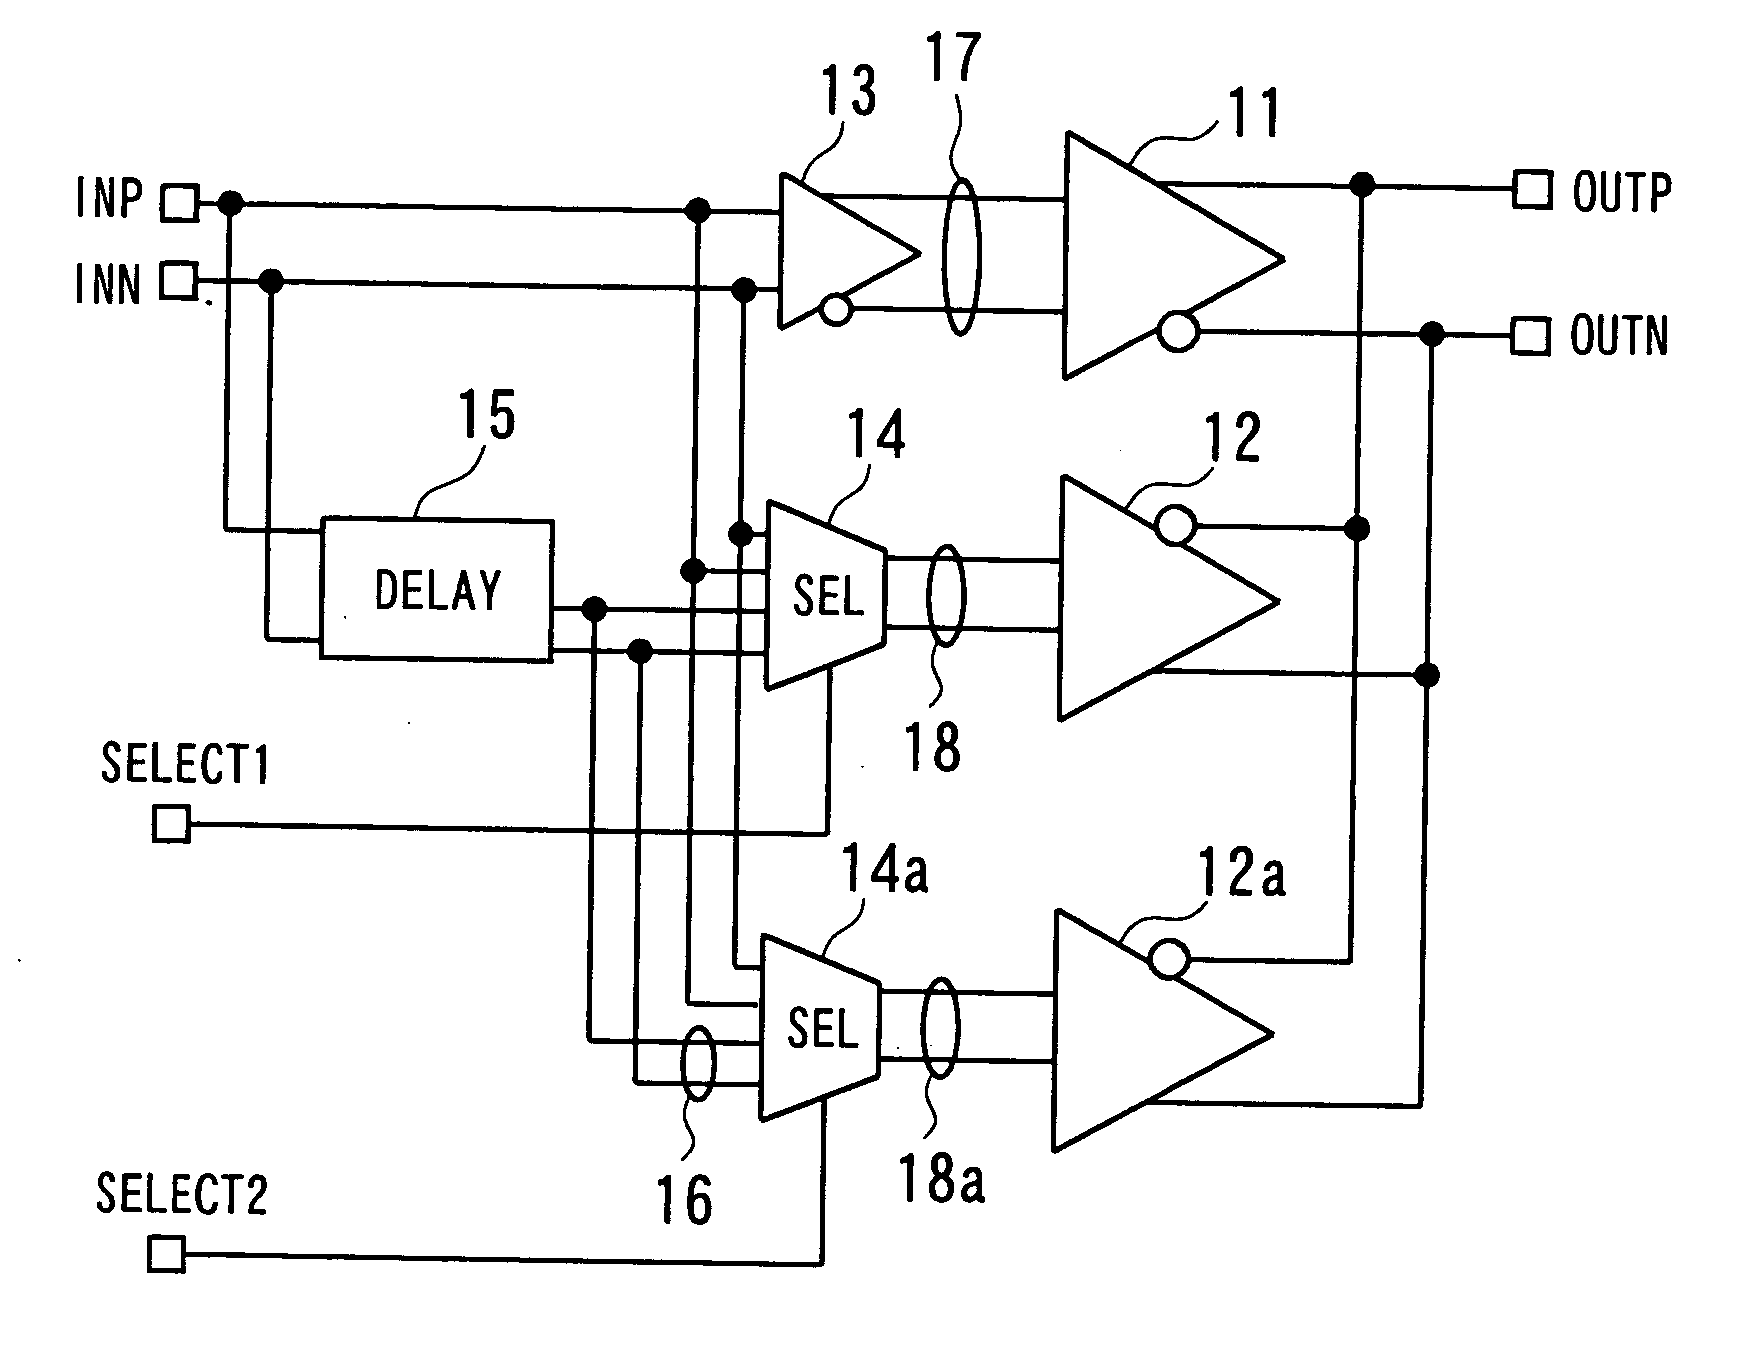 Output buffer circuit with de-emphasis function